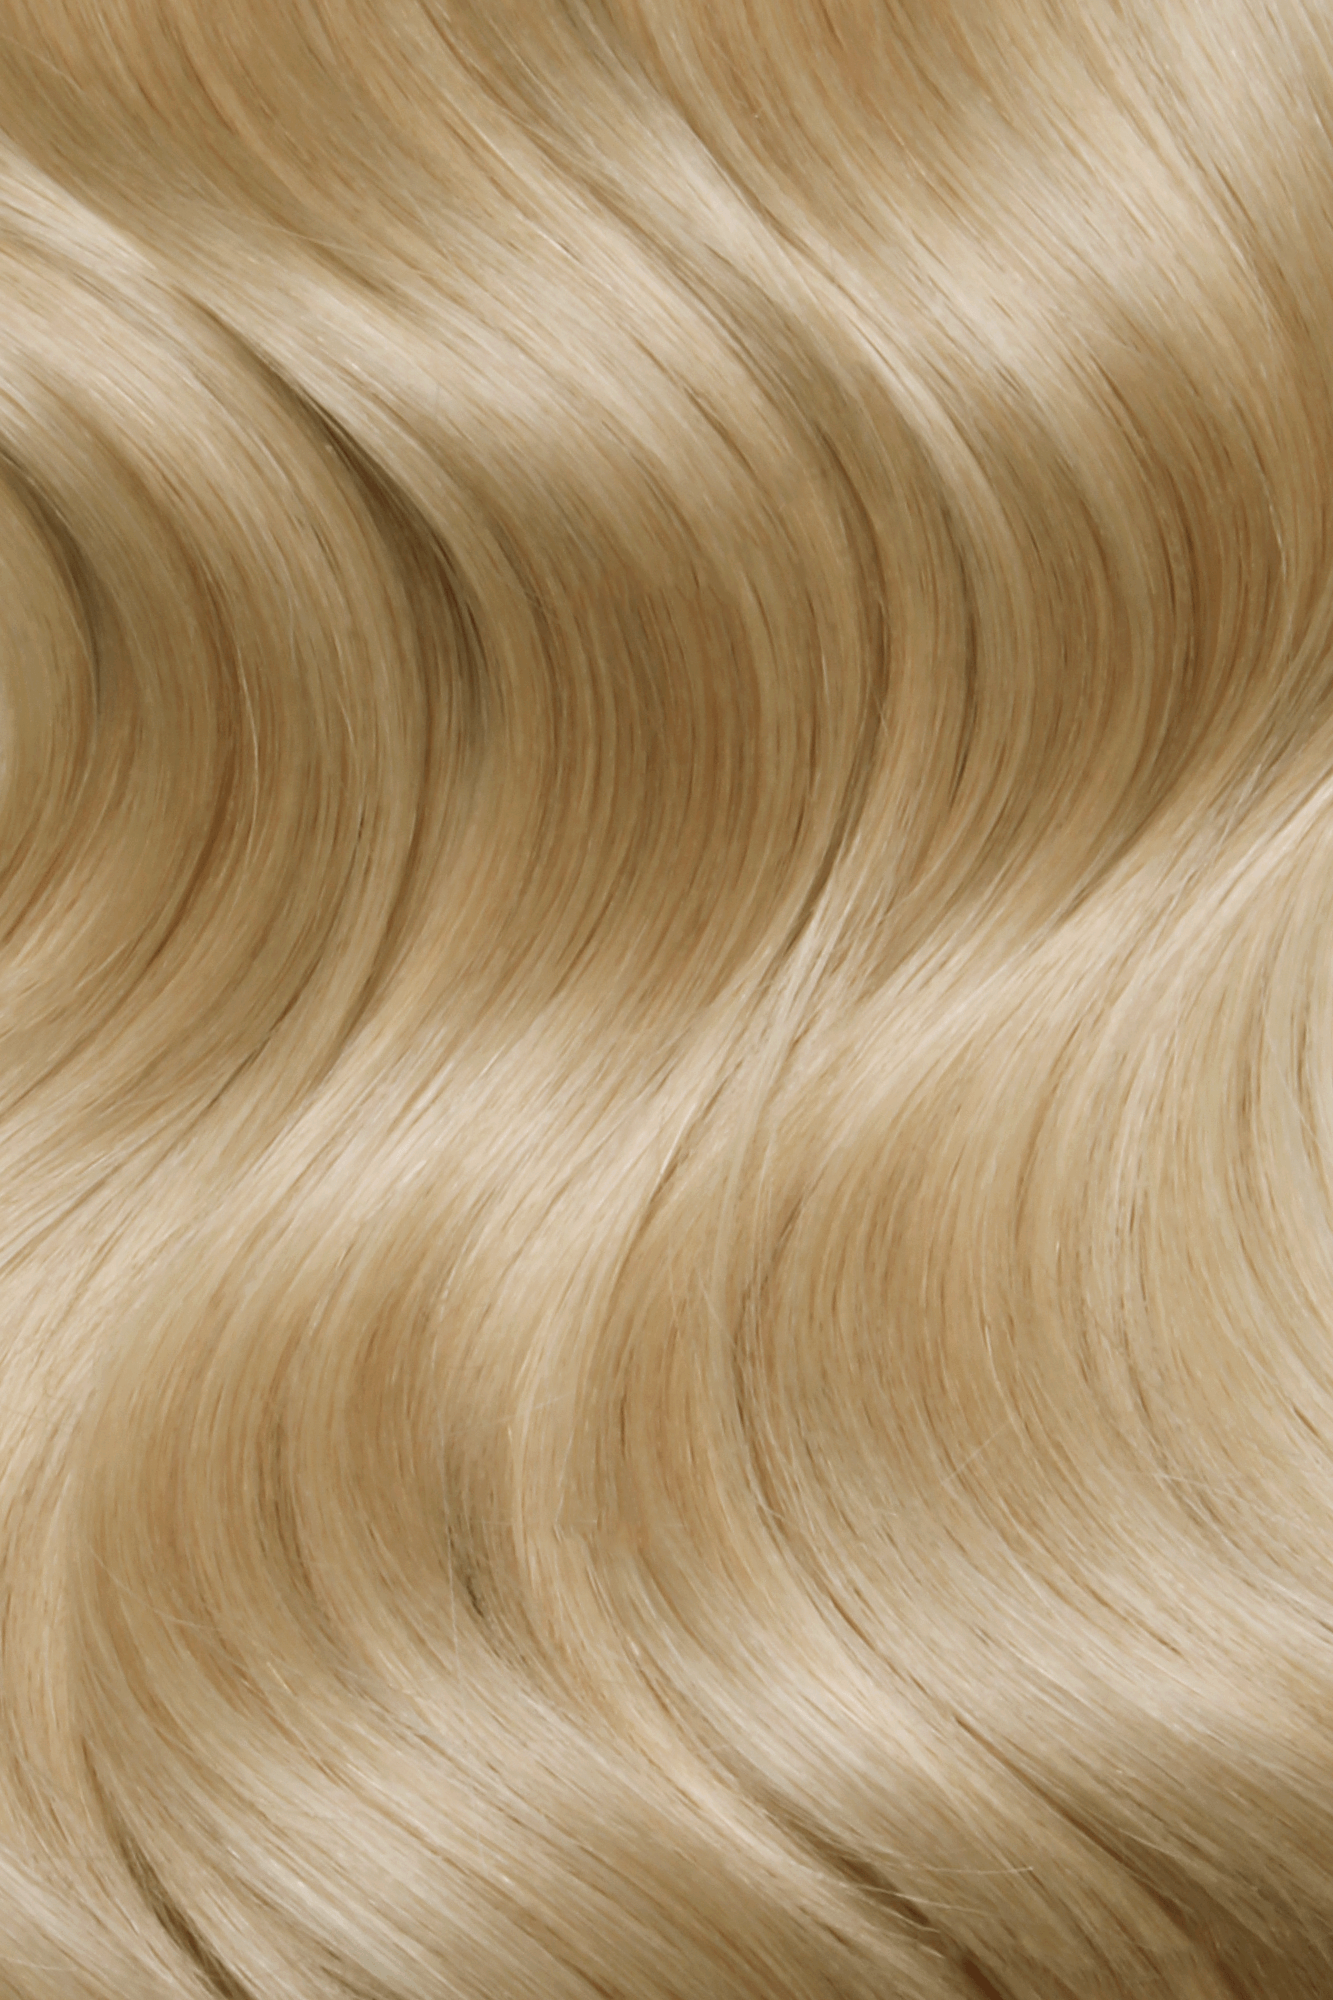 SEAMLESS® Tapes 20 Inches - SWAY Hair Extensions Natural-Ash-Blonde-20 clip-in hair extensions made of 100% Double Drawn, Remy Human Hair. SWAY SEAMLESS® Tapes, 20 inches. Lightweight, flexible, and perfect for any hairstyle.